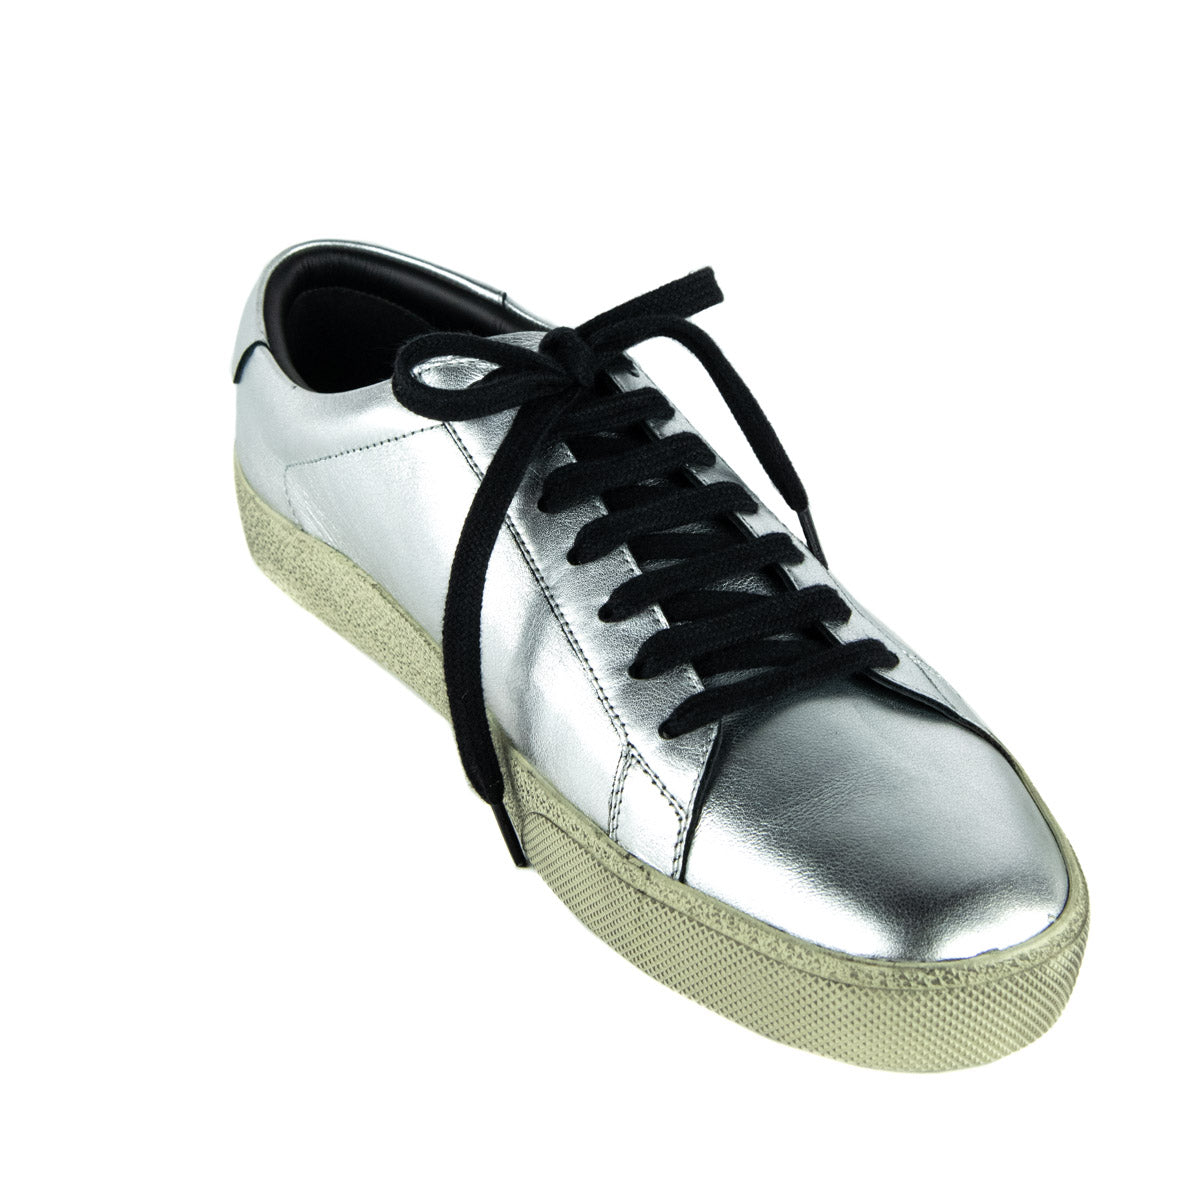 Saint Laurent Silver Leather Alpha Sigma Low Top Sneakers Size 11 | EU 41 - Love that Bag etc - Preowned Authentic Designer Handbags & Preloved Fashions